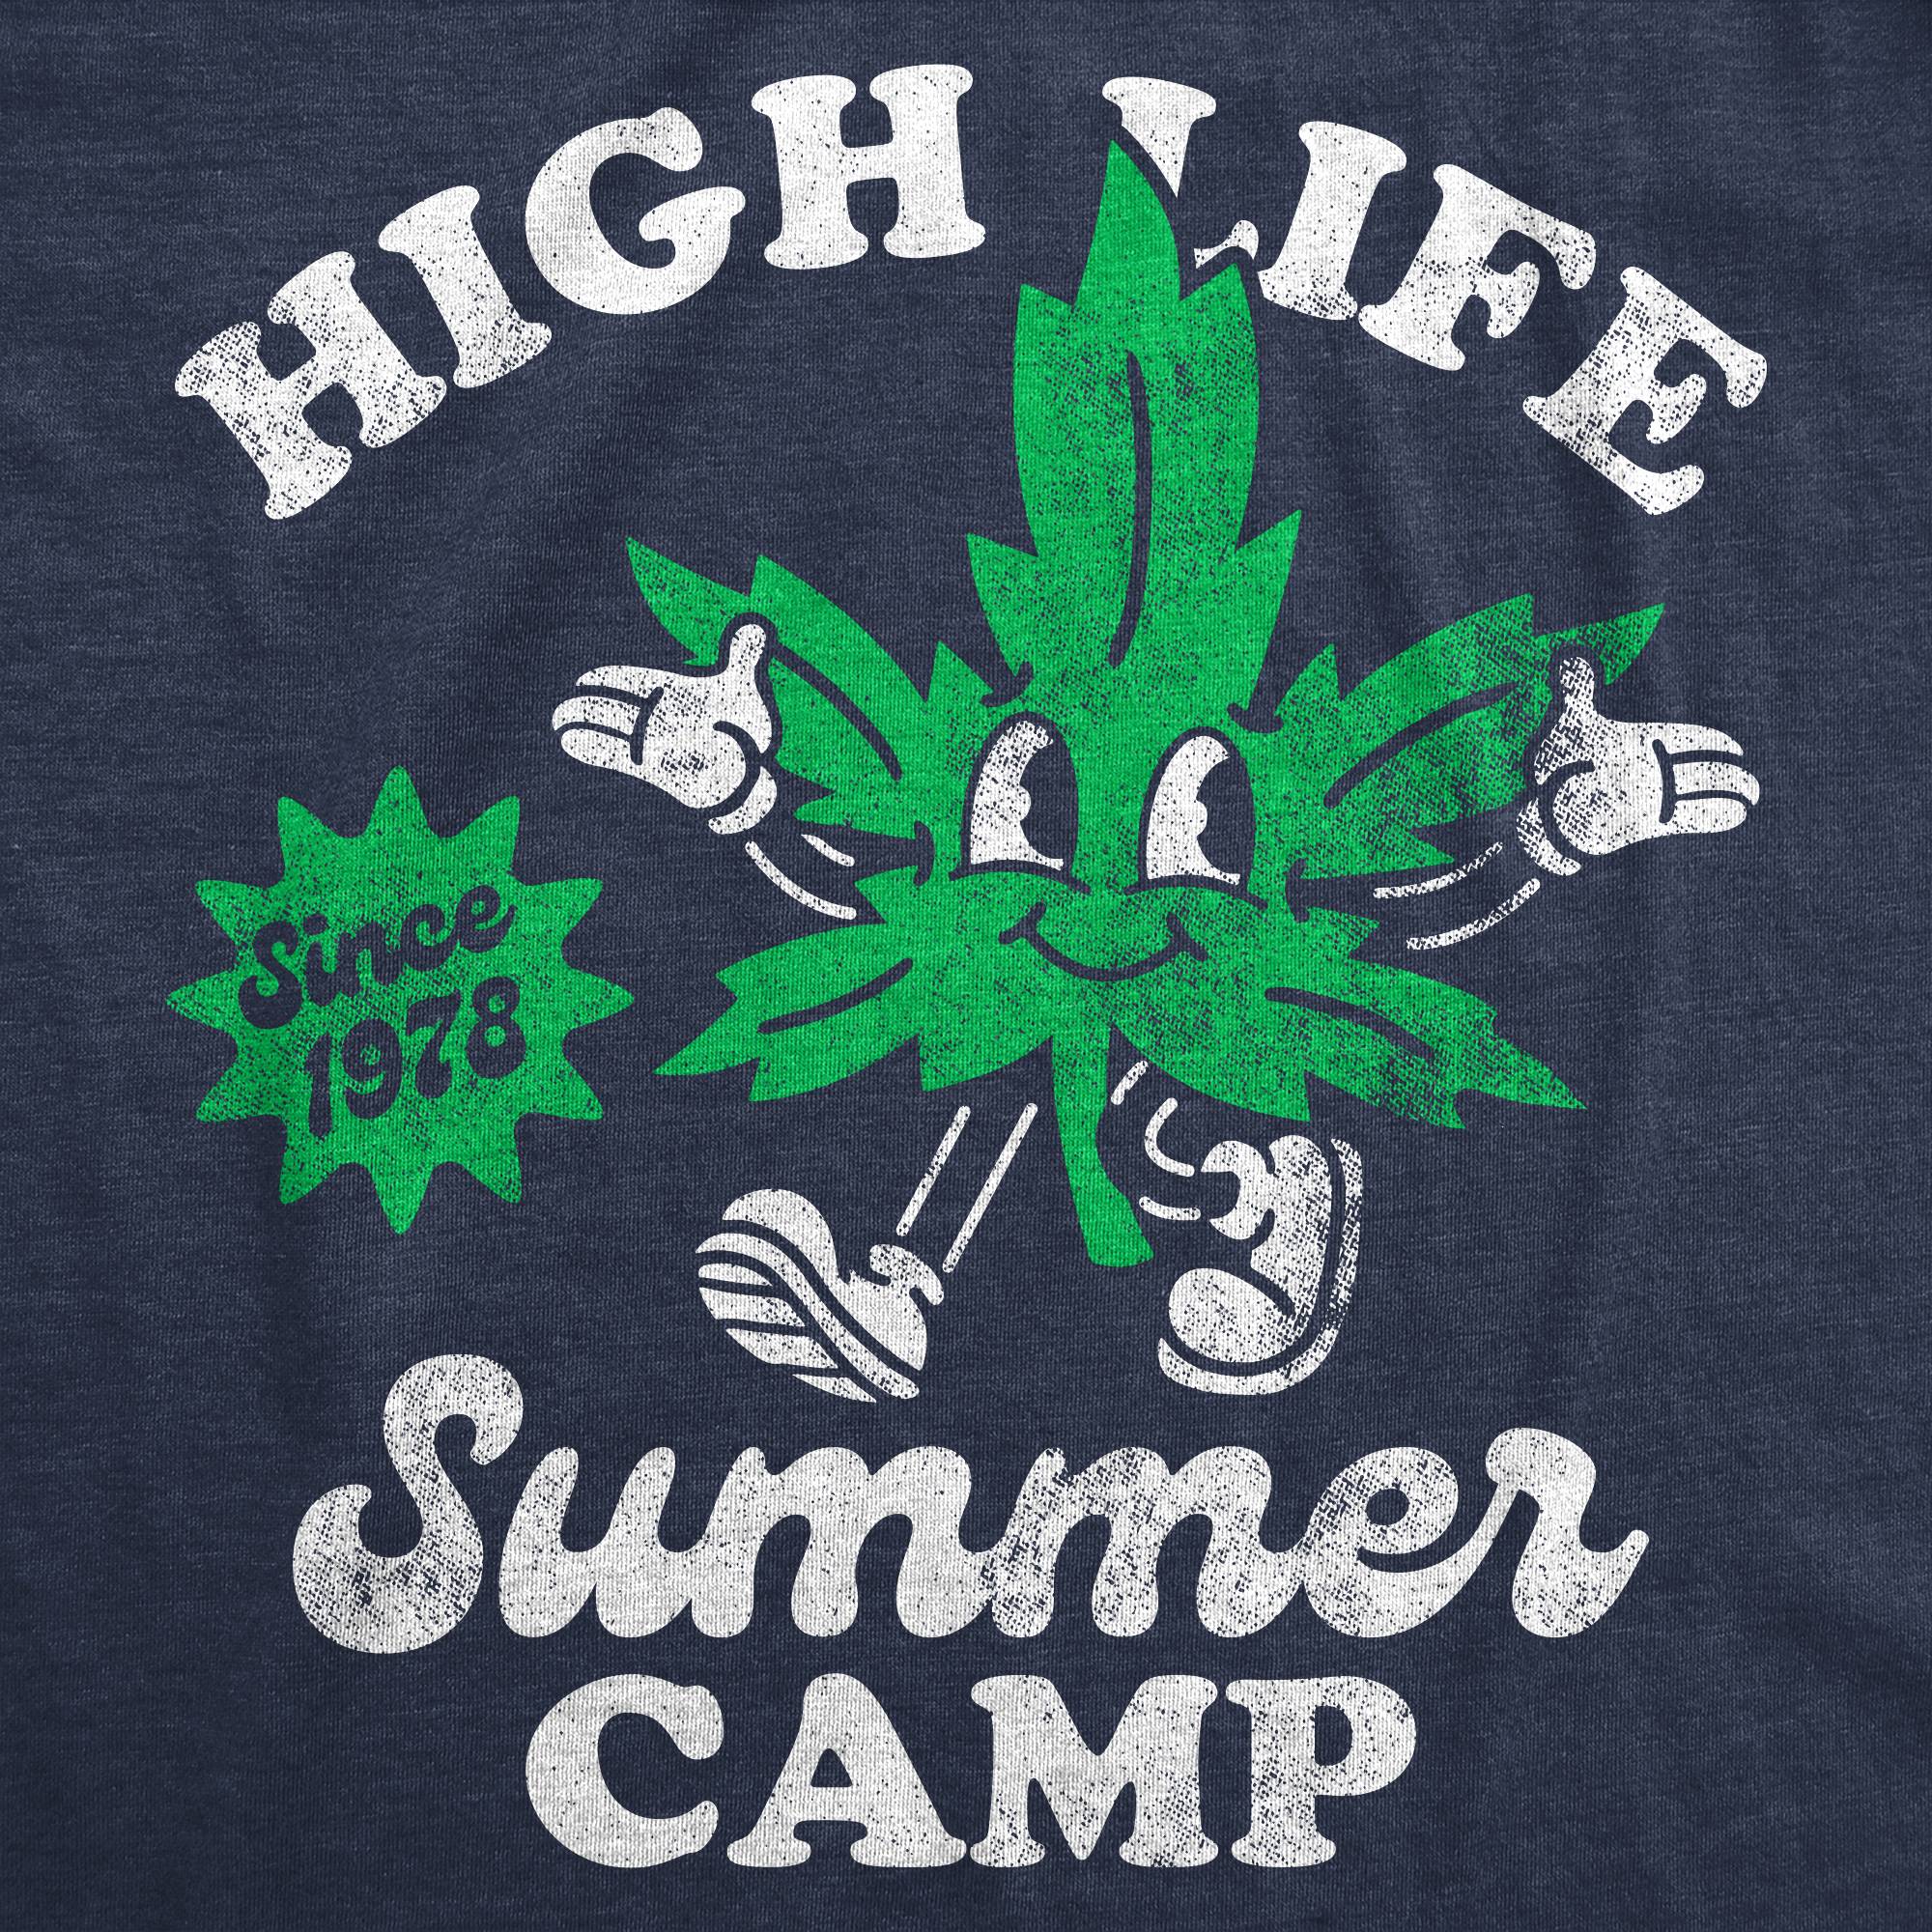 Funny Heather Navy - High Life Summer Camp High Life Summer Camp Mens T Shirt Nerdy 420 Camping sarcastic Tee